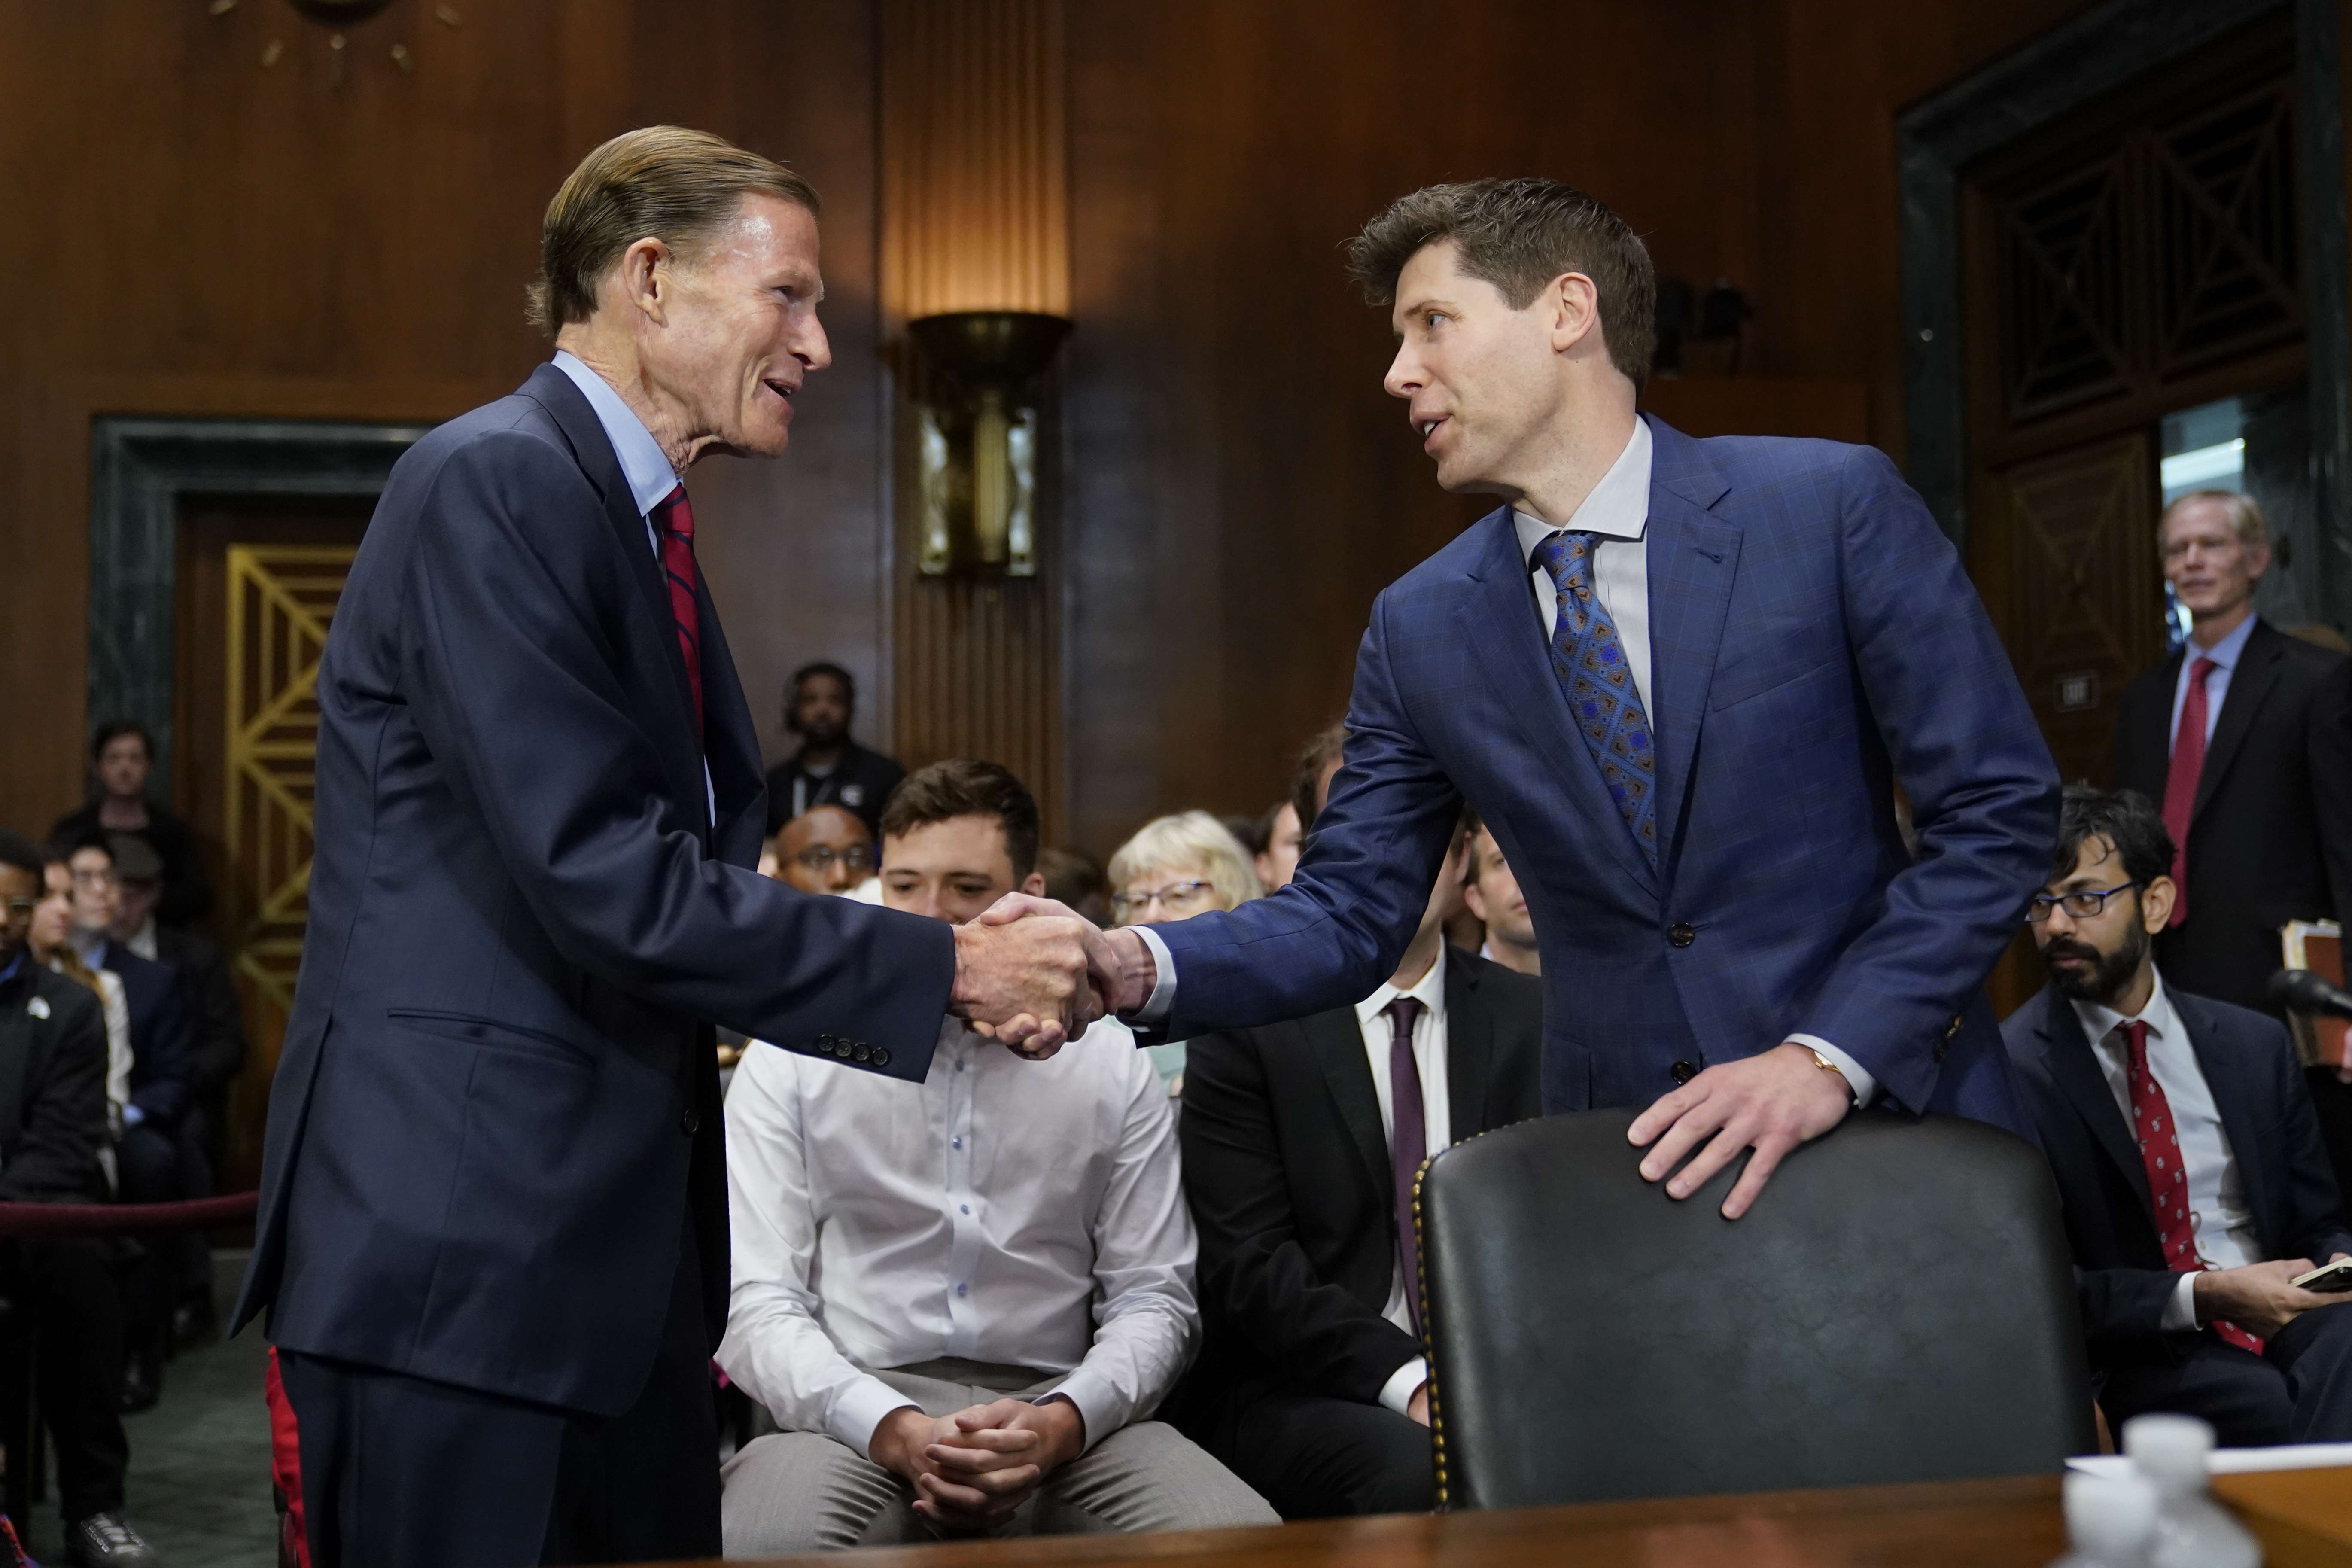 Sen. Richard Blumenthal, D-Conn., left, chair of the Senate Judiciary Subcommittee on Privacy, Technology and the Law, greets OpenAI CEO Sam Altman before a hearing on artificial intelligence, Tuesday, May 16, 2023, on Capitol Hill in Washington. 